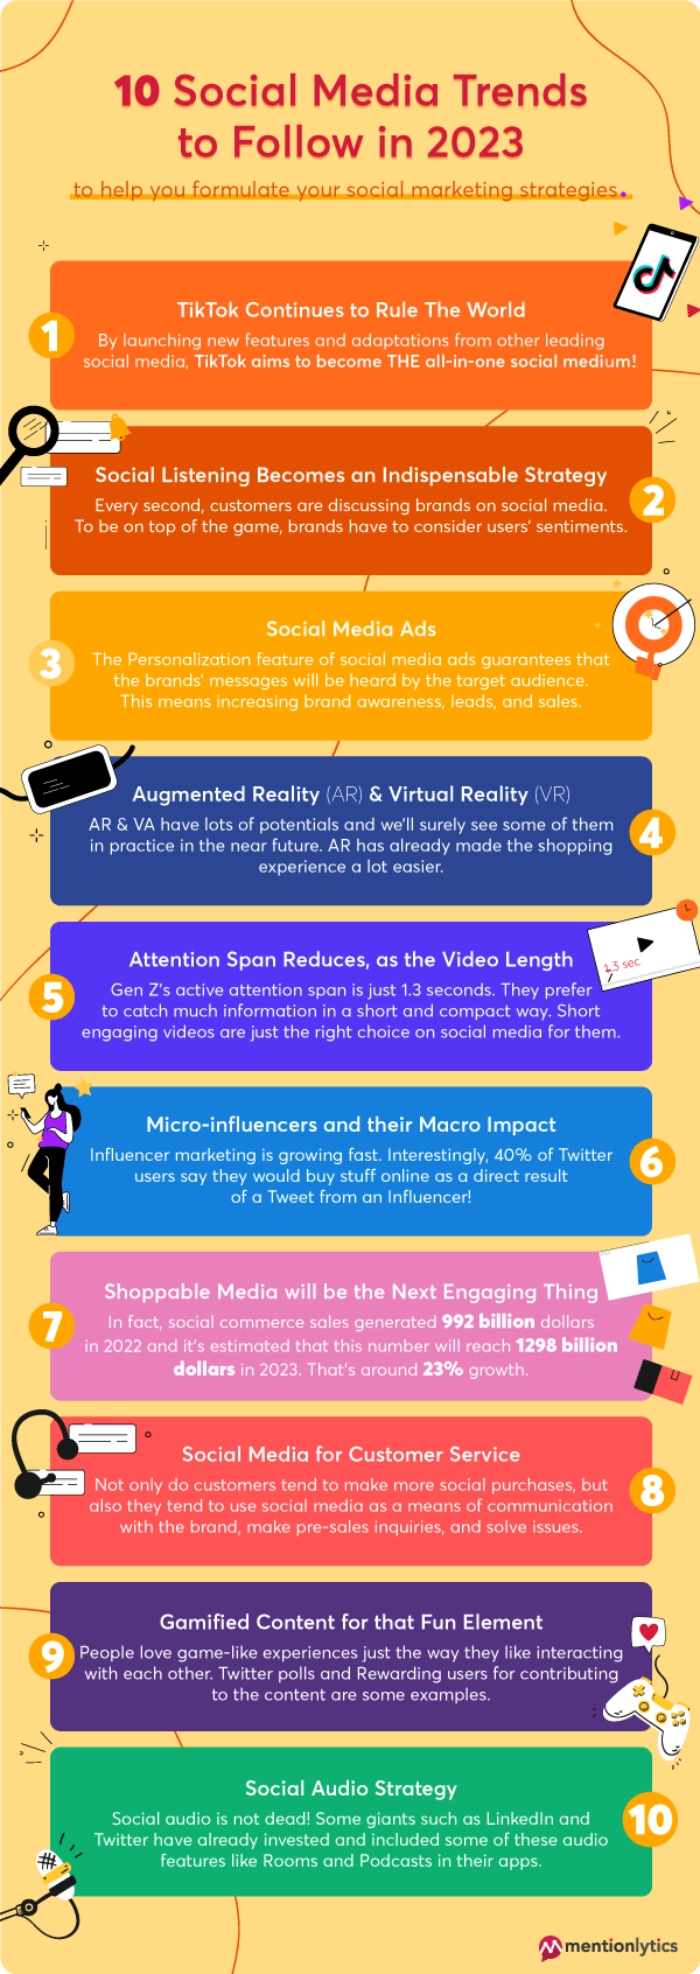 10 Social Media Trends to Follow in 2023 (Infographic)